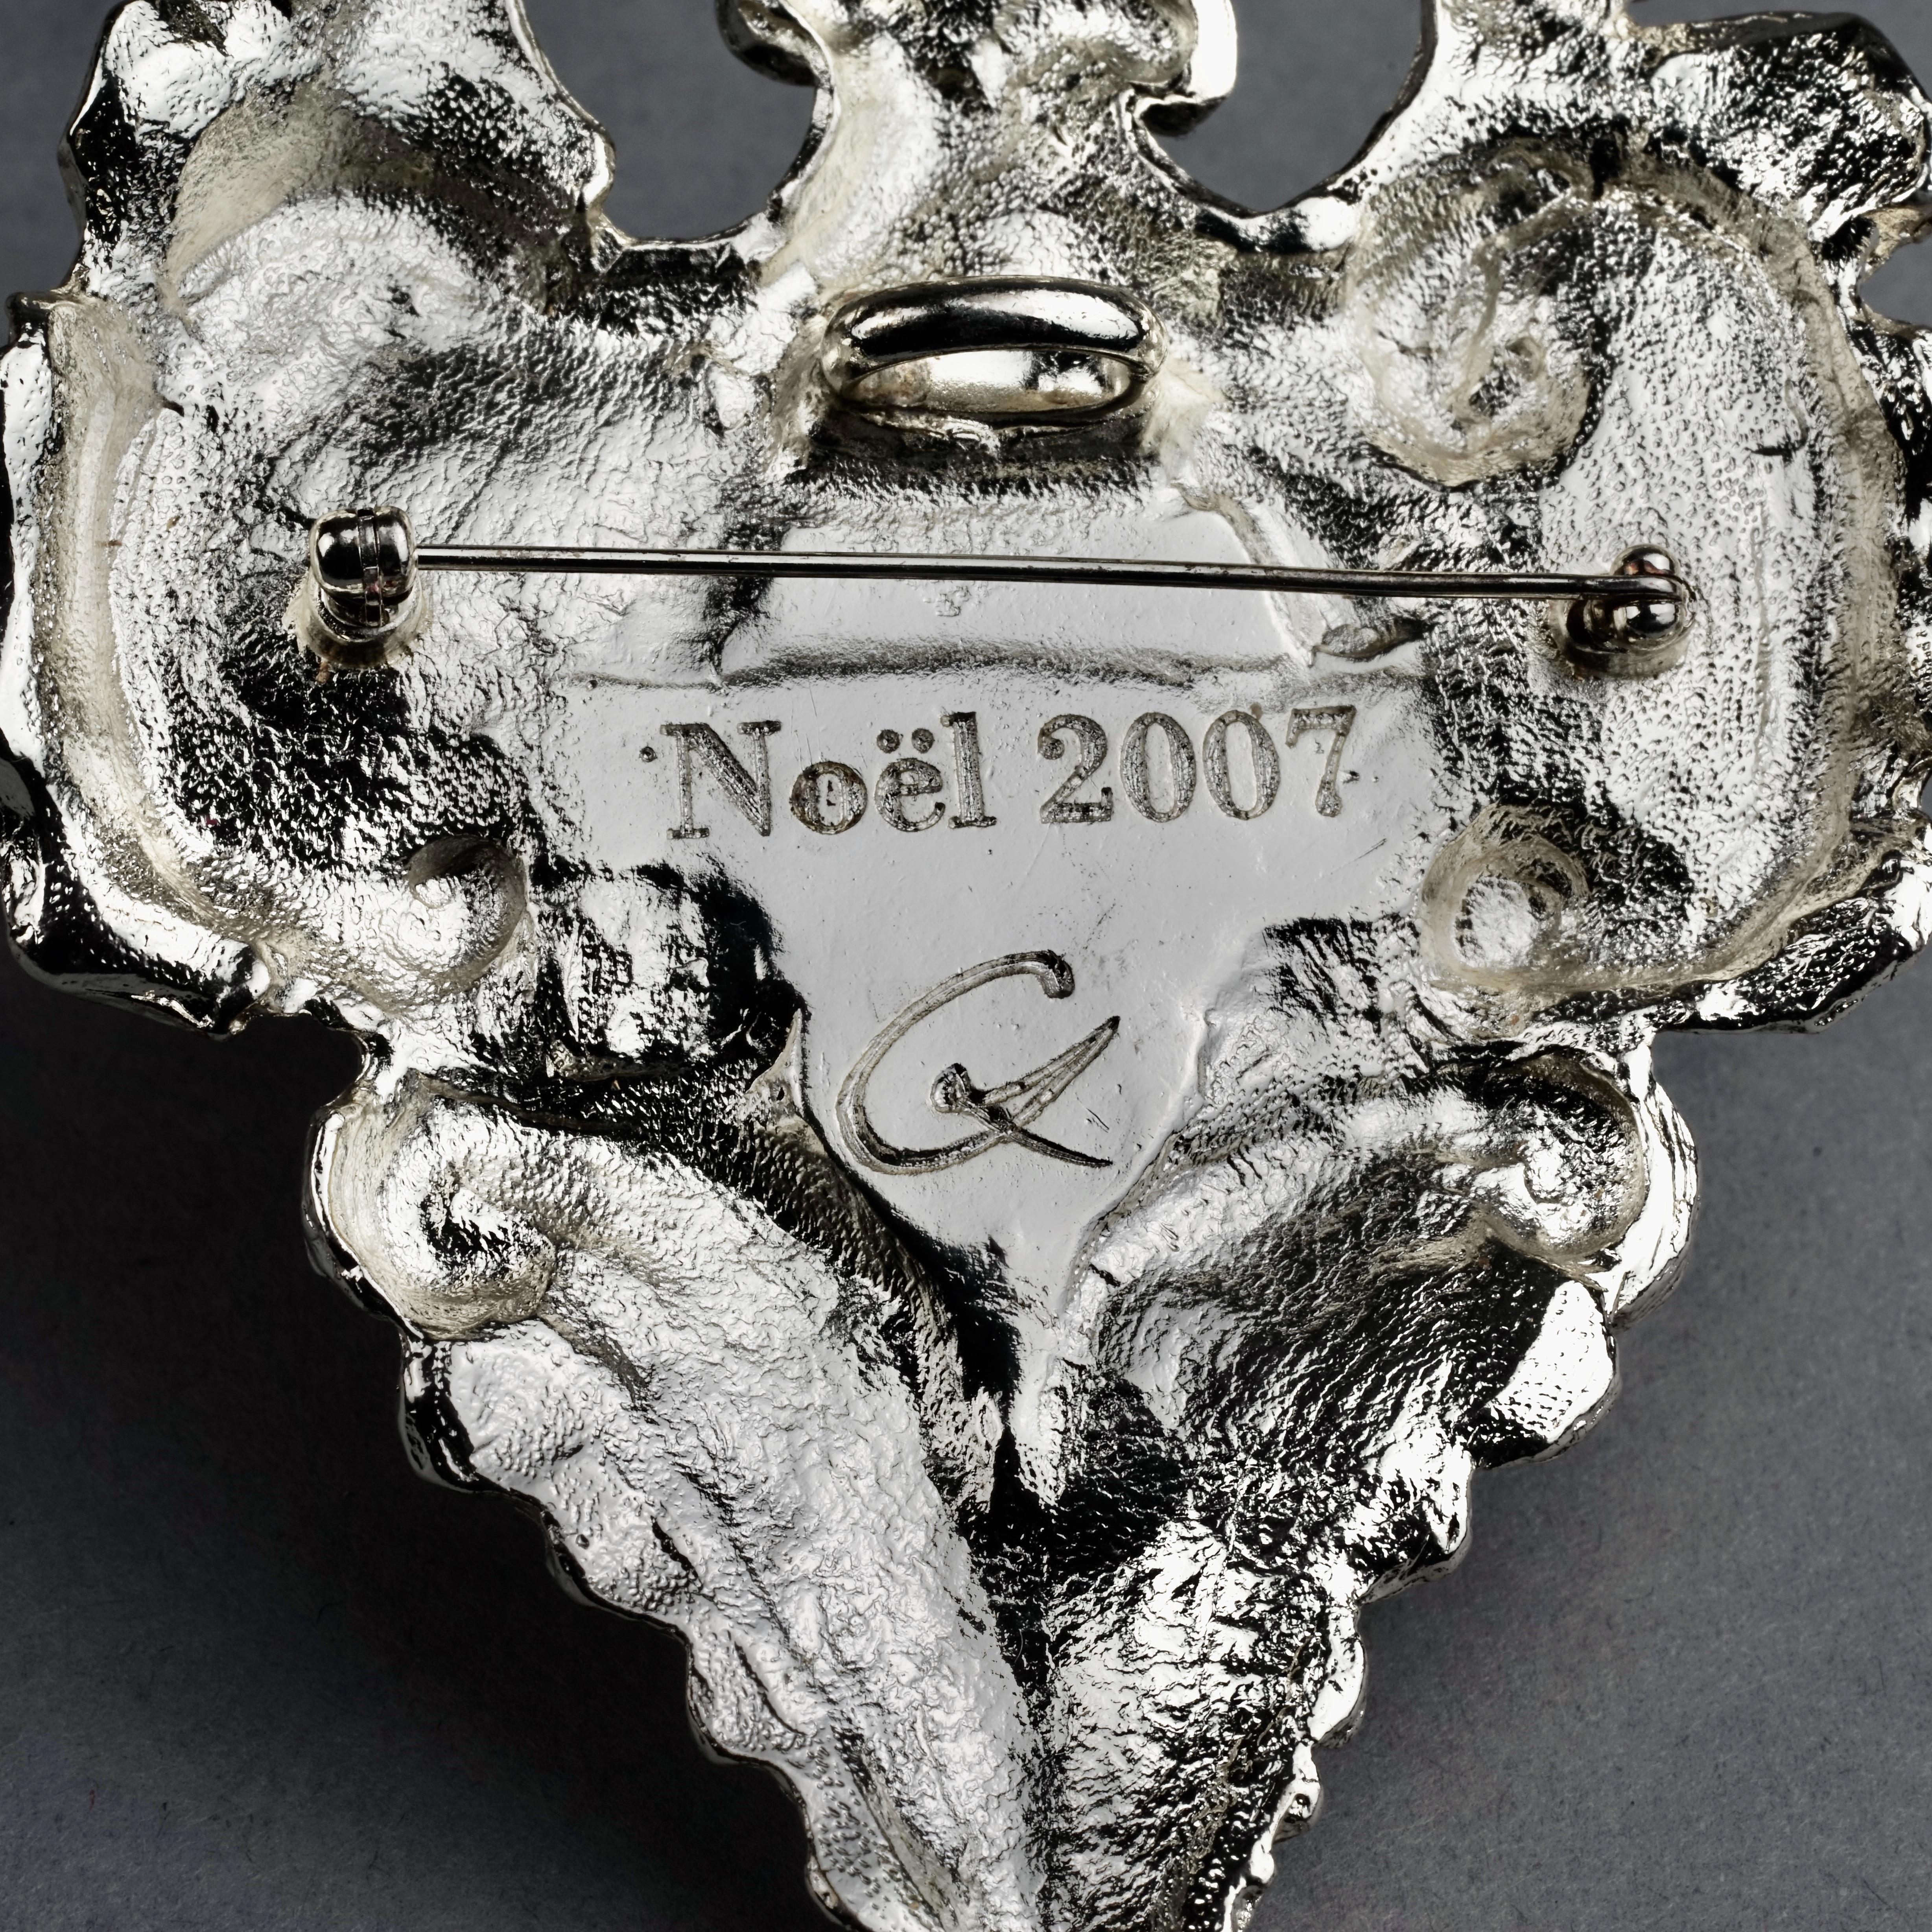 Massive CHRISTIAN LACROIX NOEL 2007 Mirror Heart Limited Edition Pendant Brooch For Sale 5